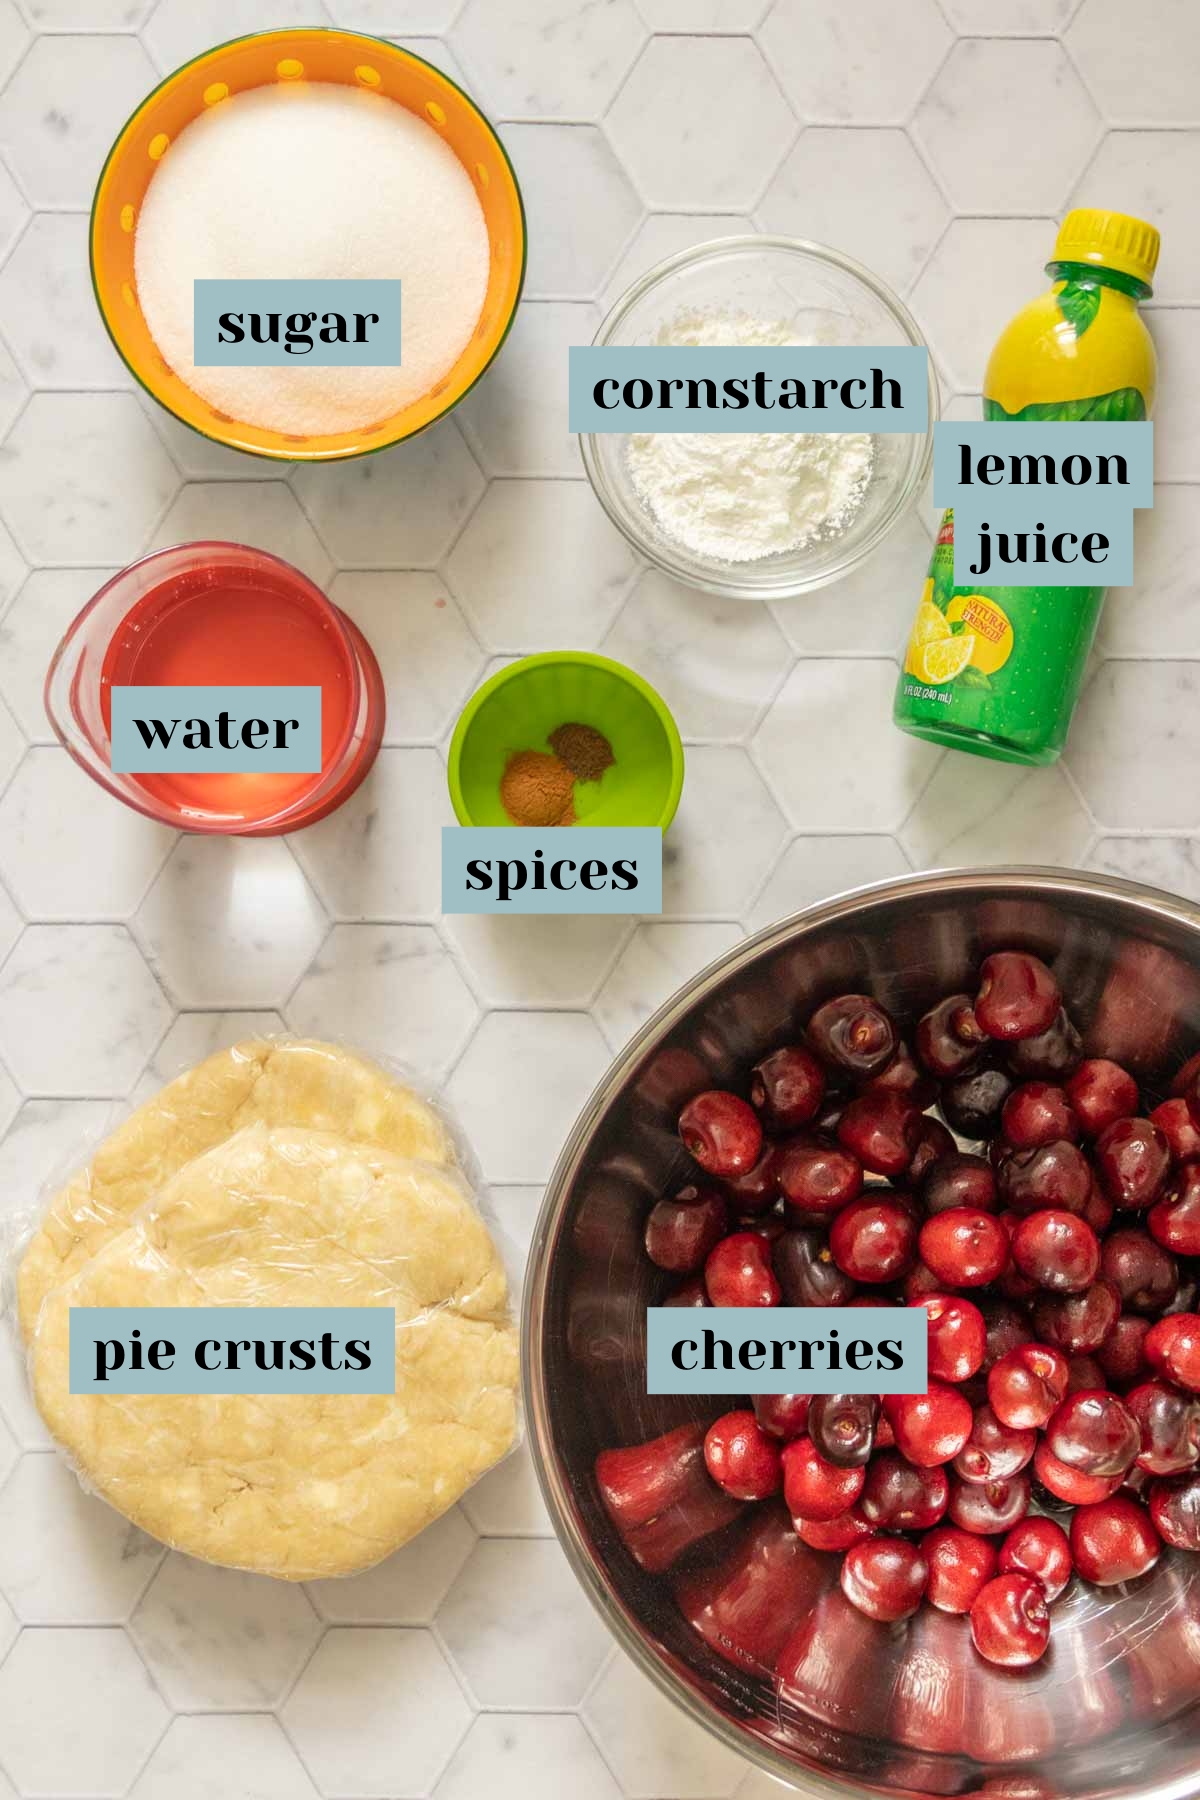 Ingredients for cherry pie on a tile surface with labels.